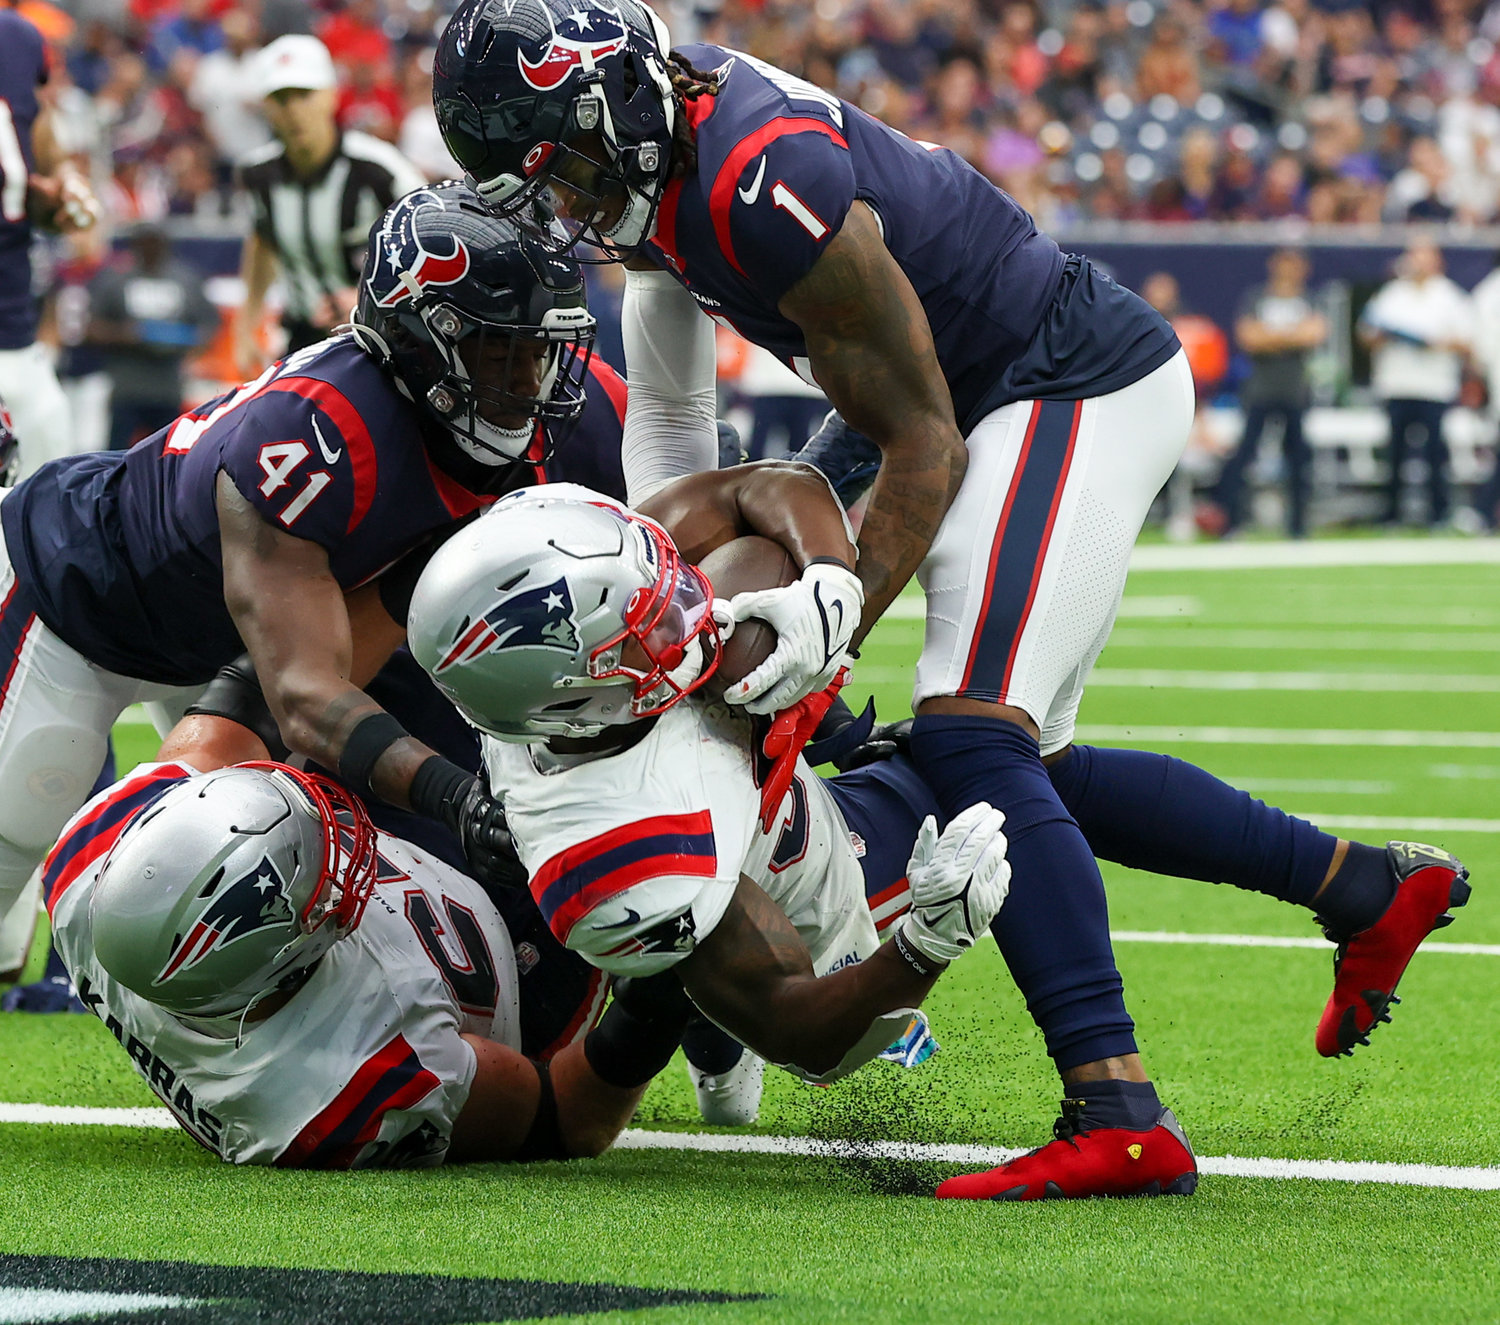 New England Patriots running back Damien Harris (37) scores on a 1-yard touchdown carry during an NFL game between Houston and New England on October 10, 2021 in Houston, Texas. The Patriots won 25-22.